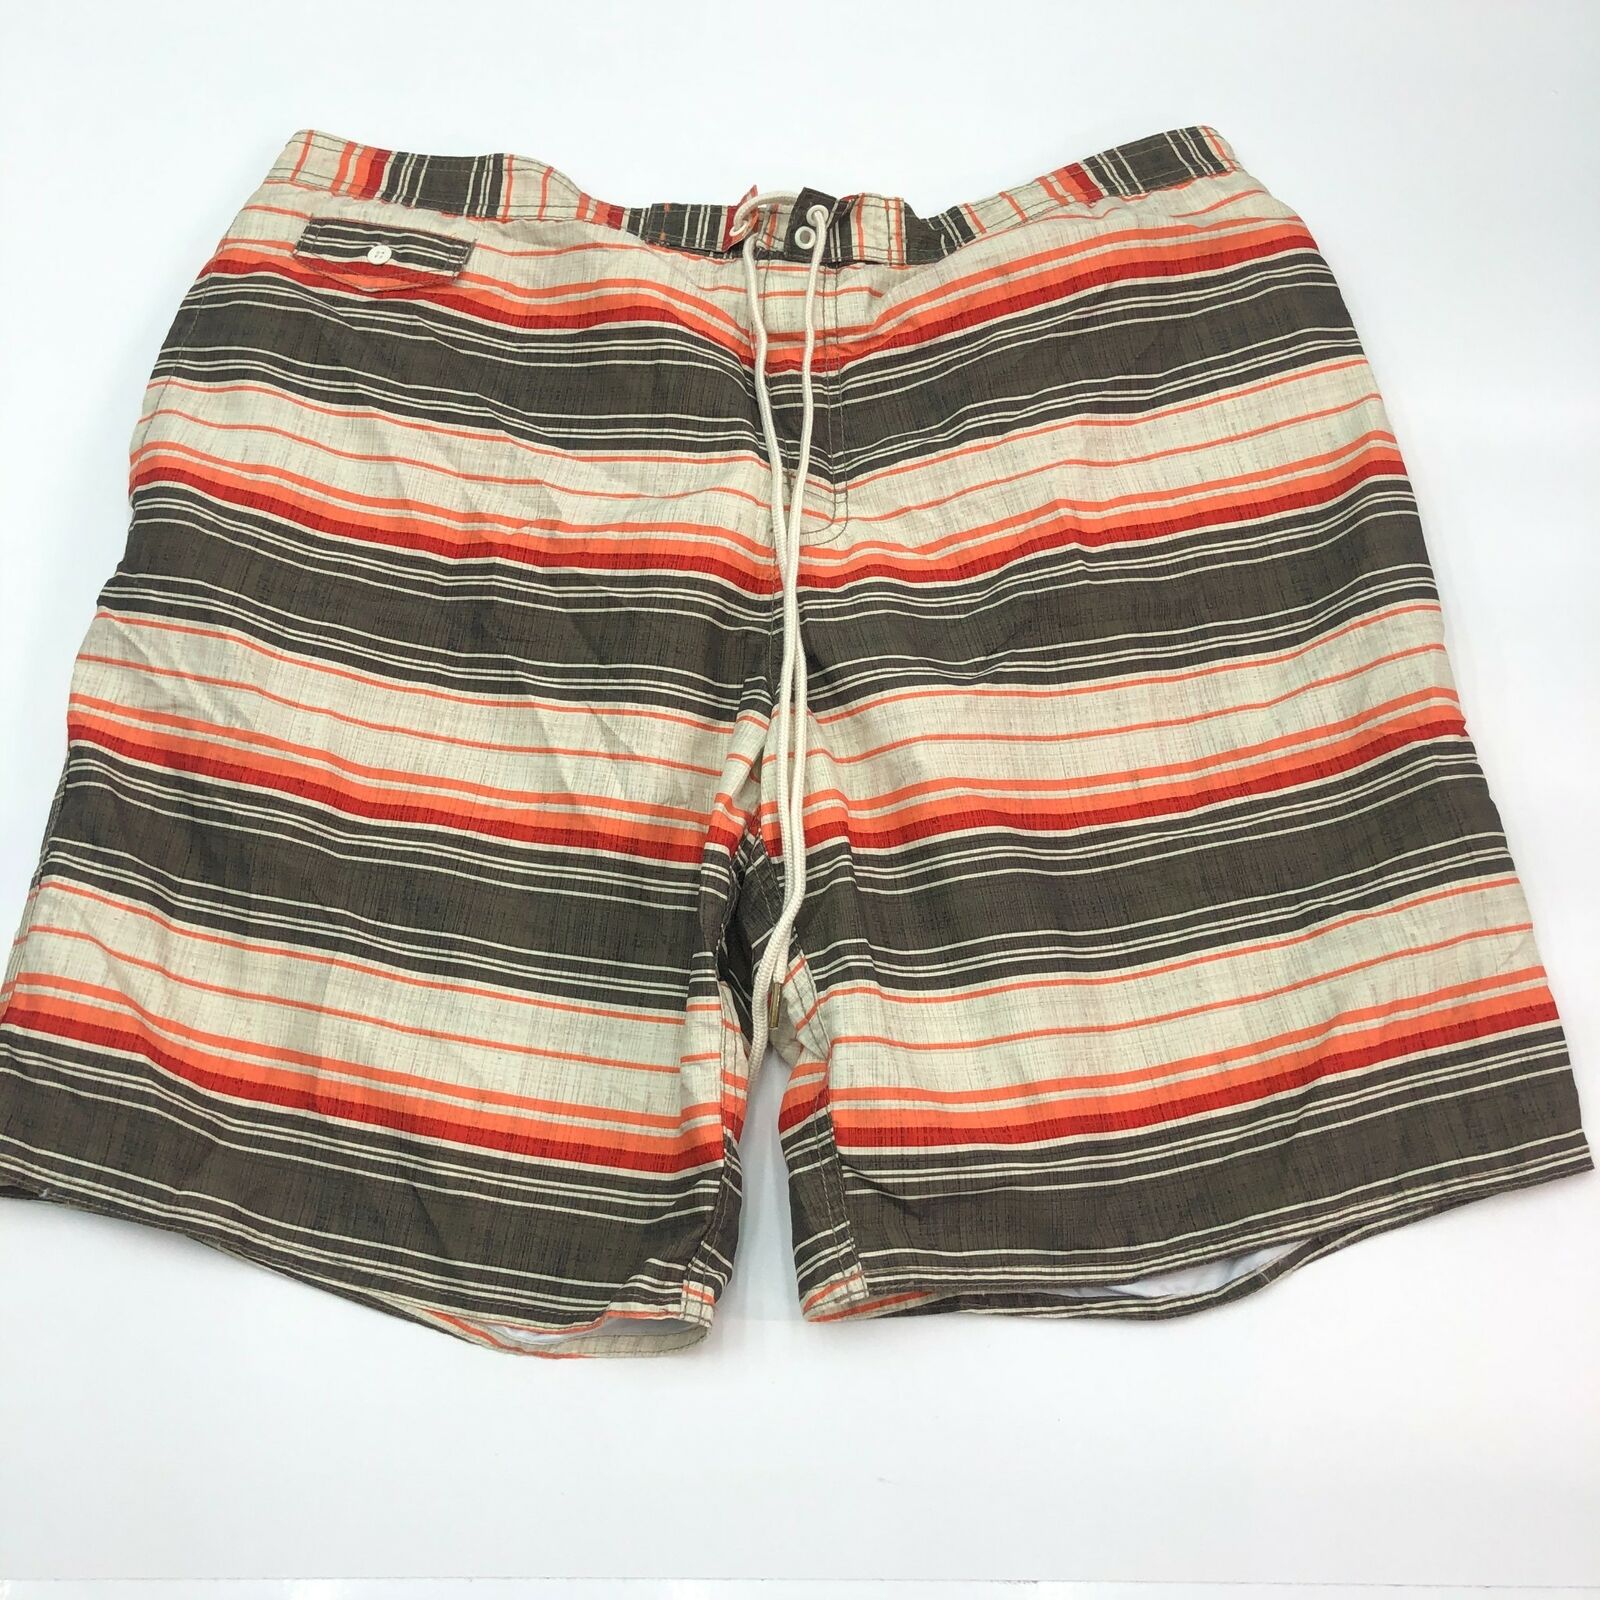 St. John's Bay Swim Brand new Trunks Mens 2XL XXL Lined Lace Orange Our shop most popular Tie Striped Mesh Brown